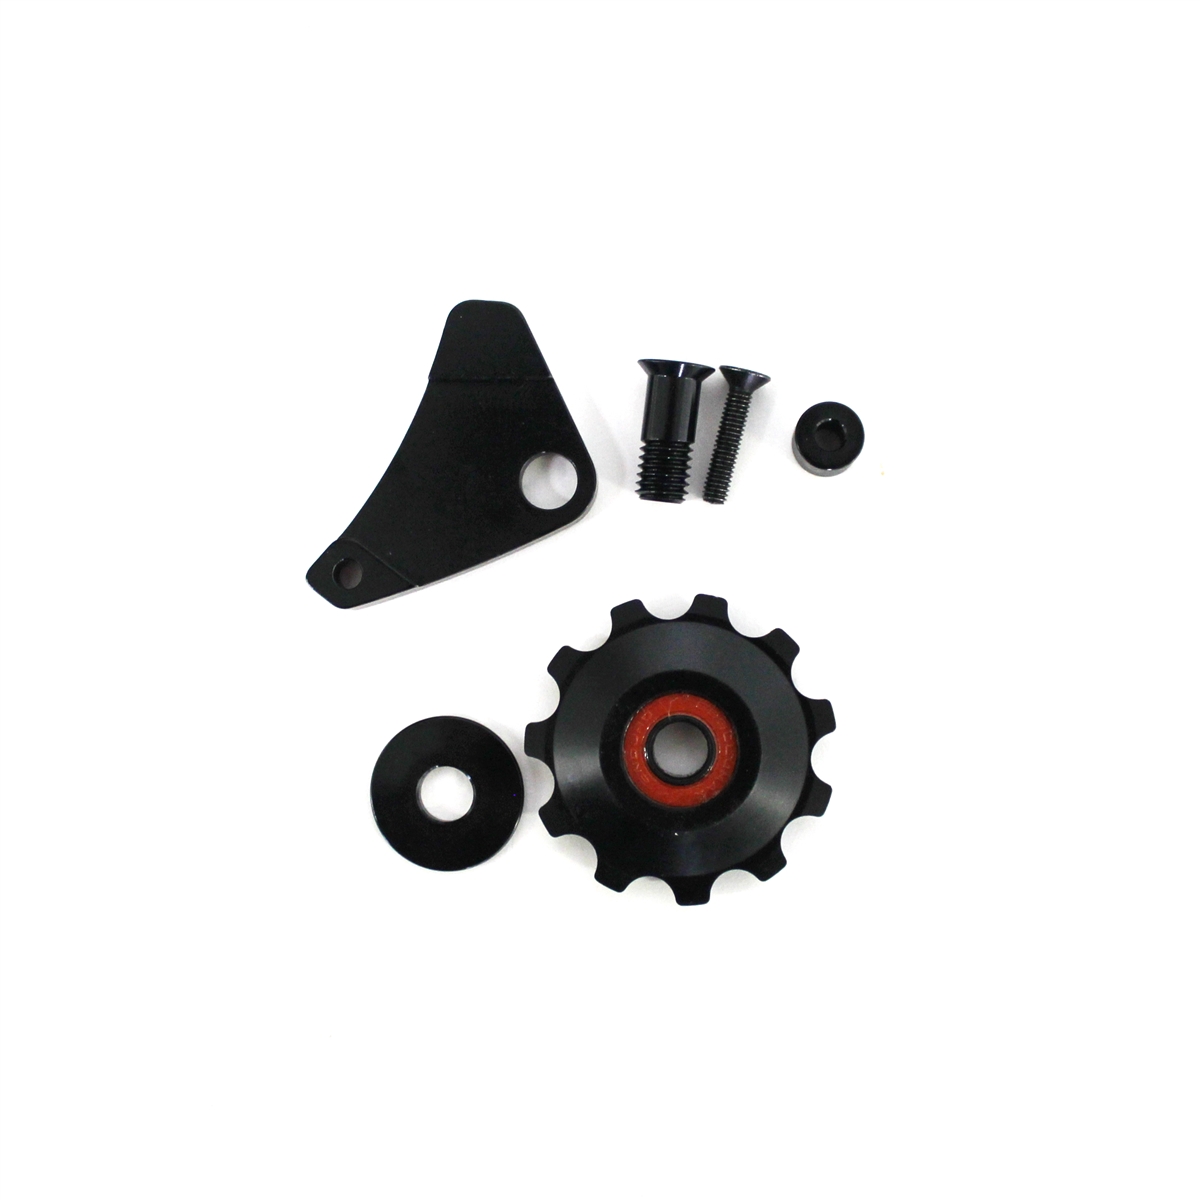 Lower Chain Guide Kit for Powerplay Models